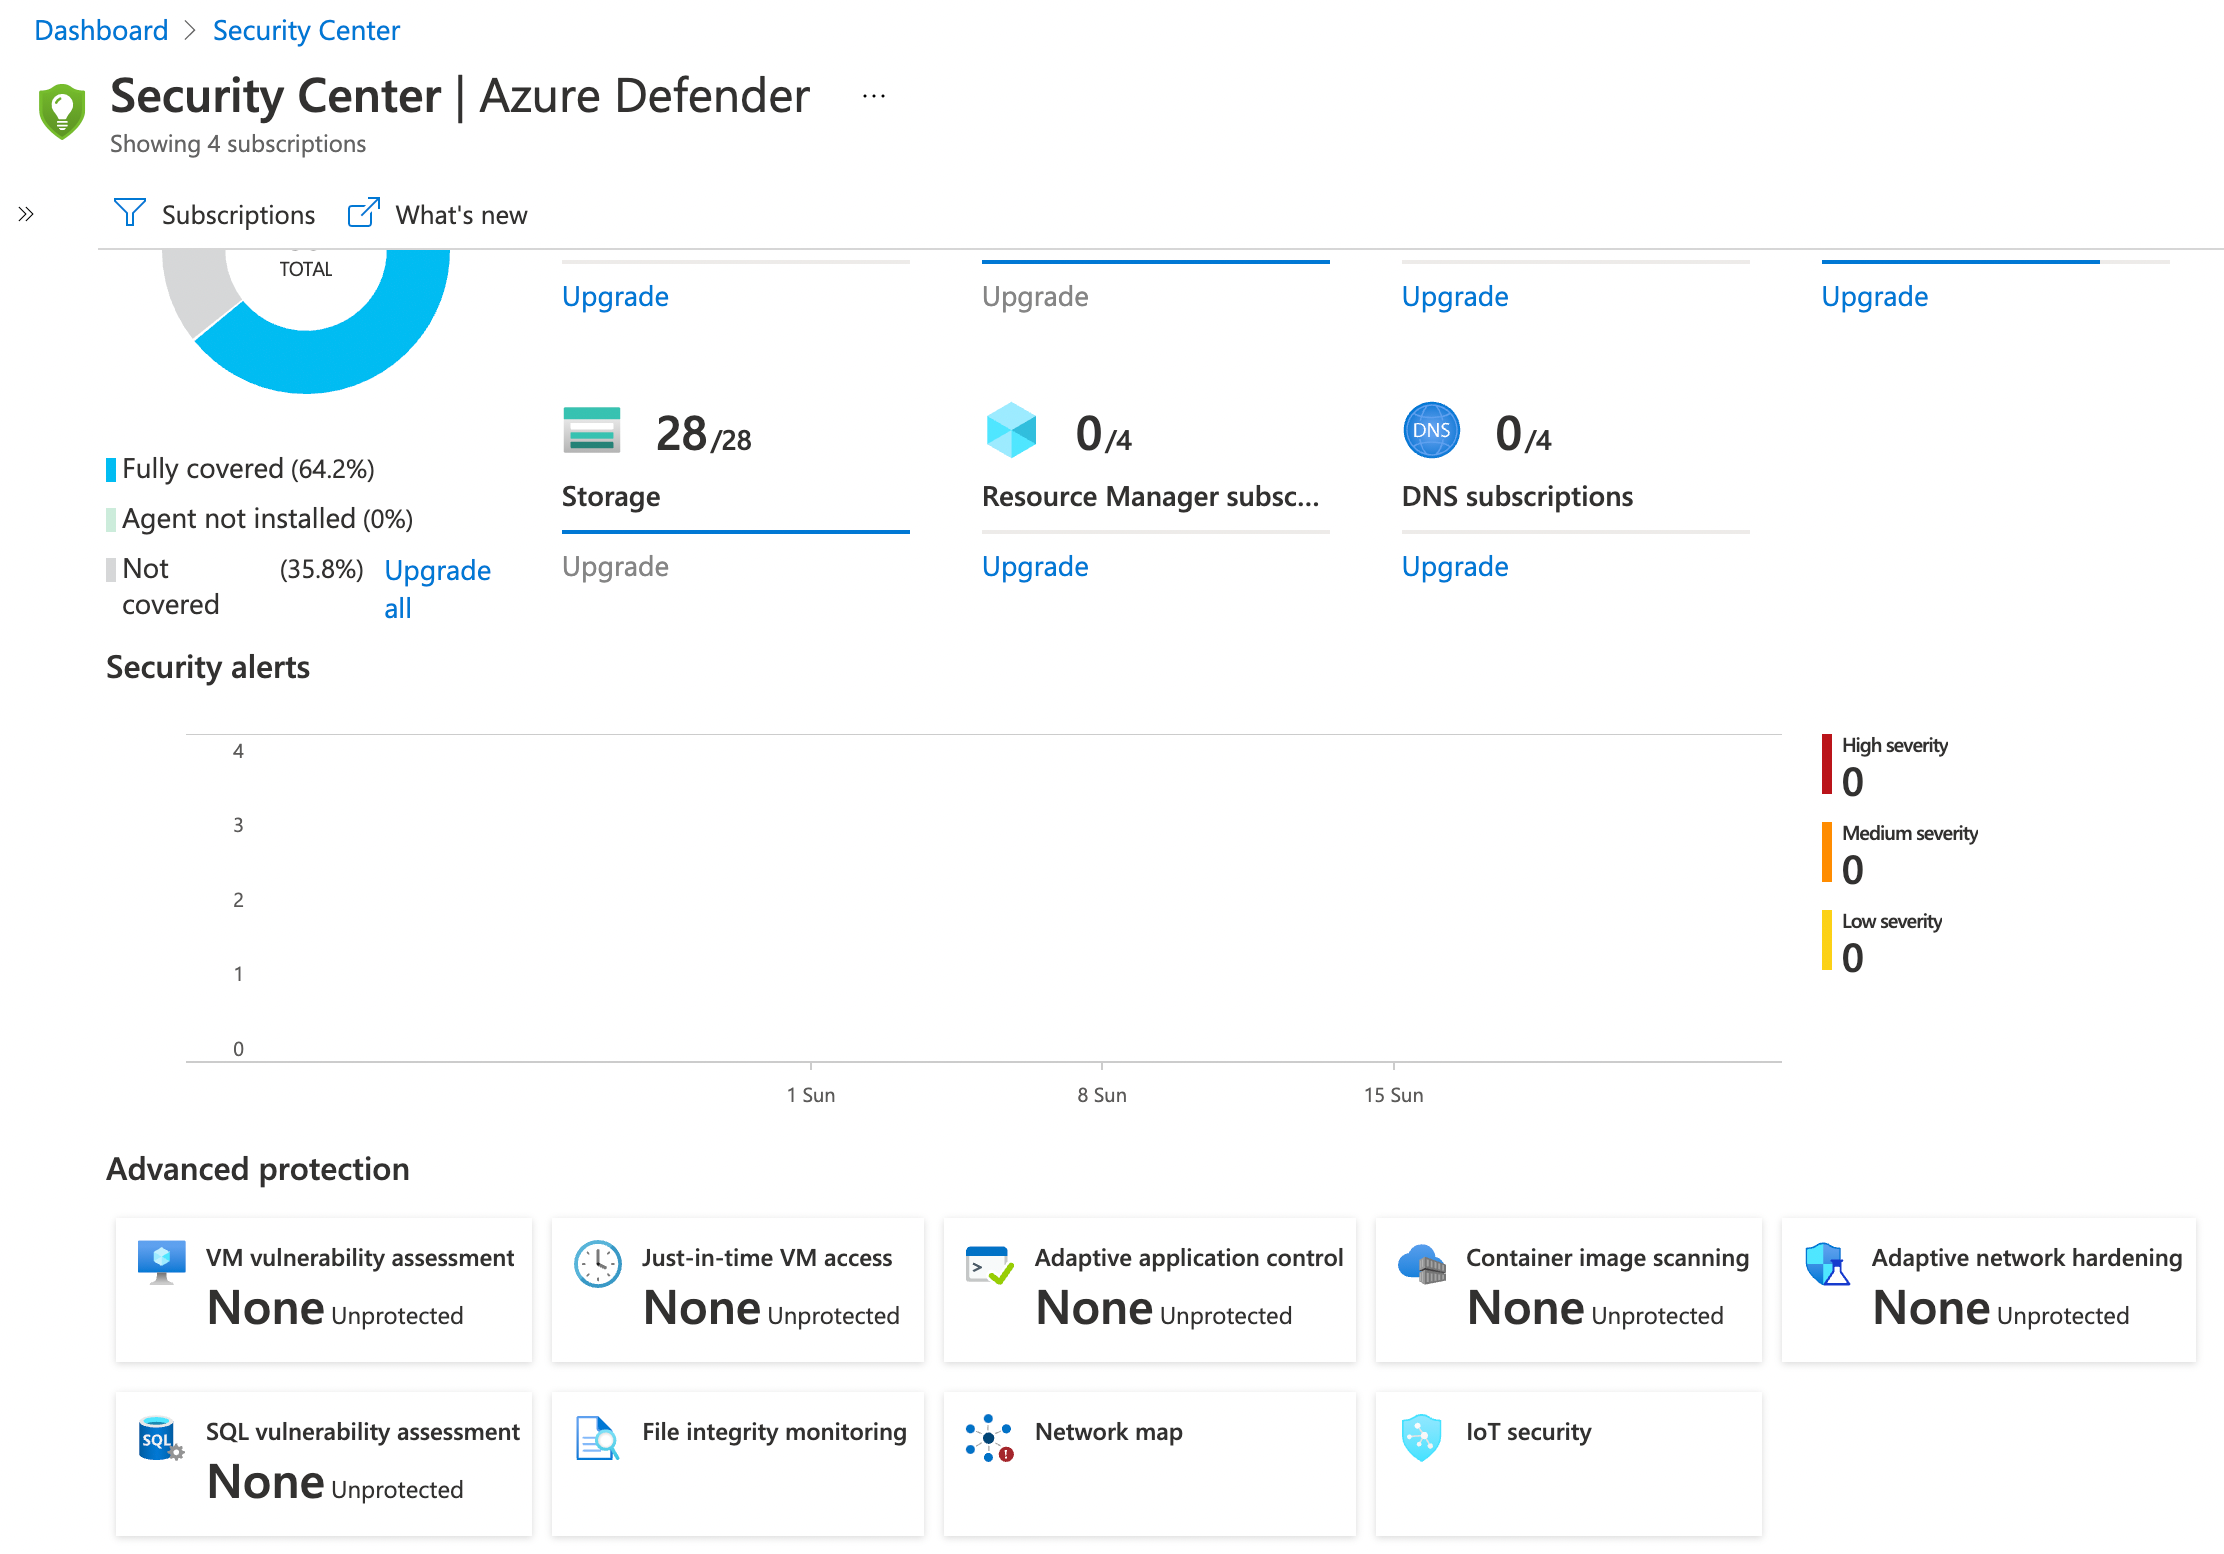 Screenshot showing several Azure Defender Advanced Protection options including VM vulnerability assessment, Just-in-Time VM Access, Adaptive Application Control, Container Image Scanning, Adaptive network hardening, SQL vulnerability assessment, File integrity monitoring, Network map and IoT Security)